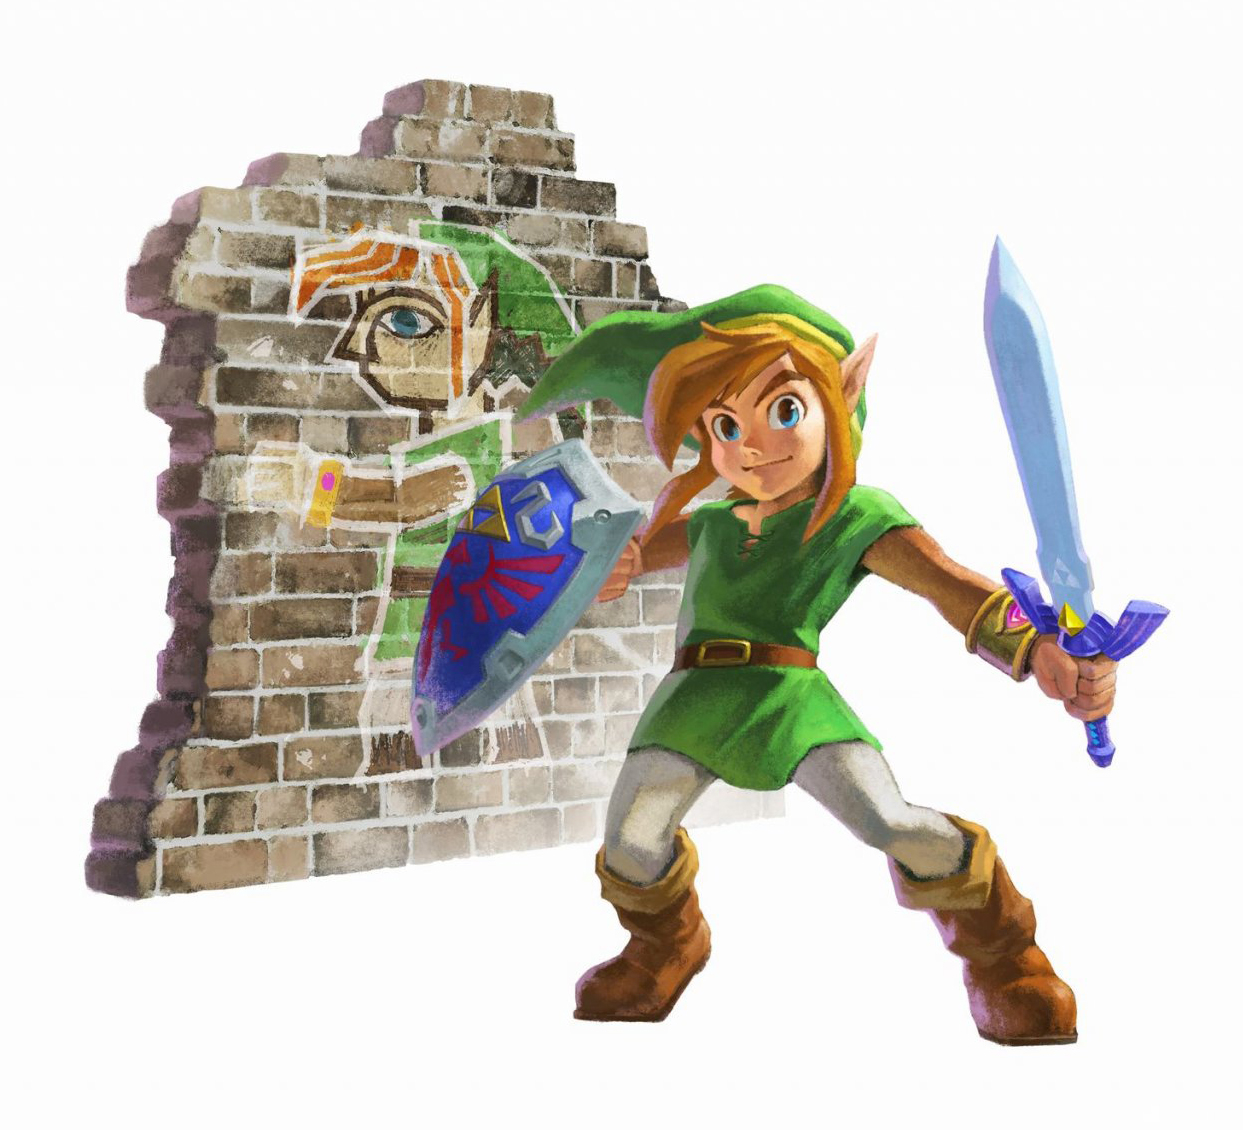 Tips For Playing The Legend Of Zelda: A Link Between Worlds